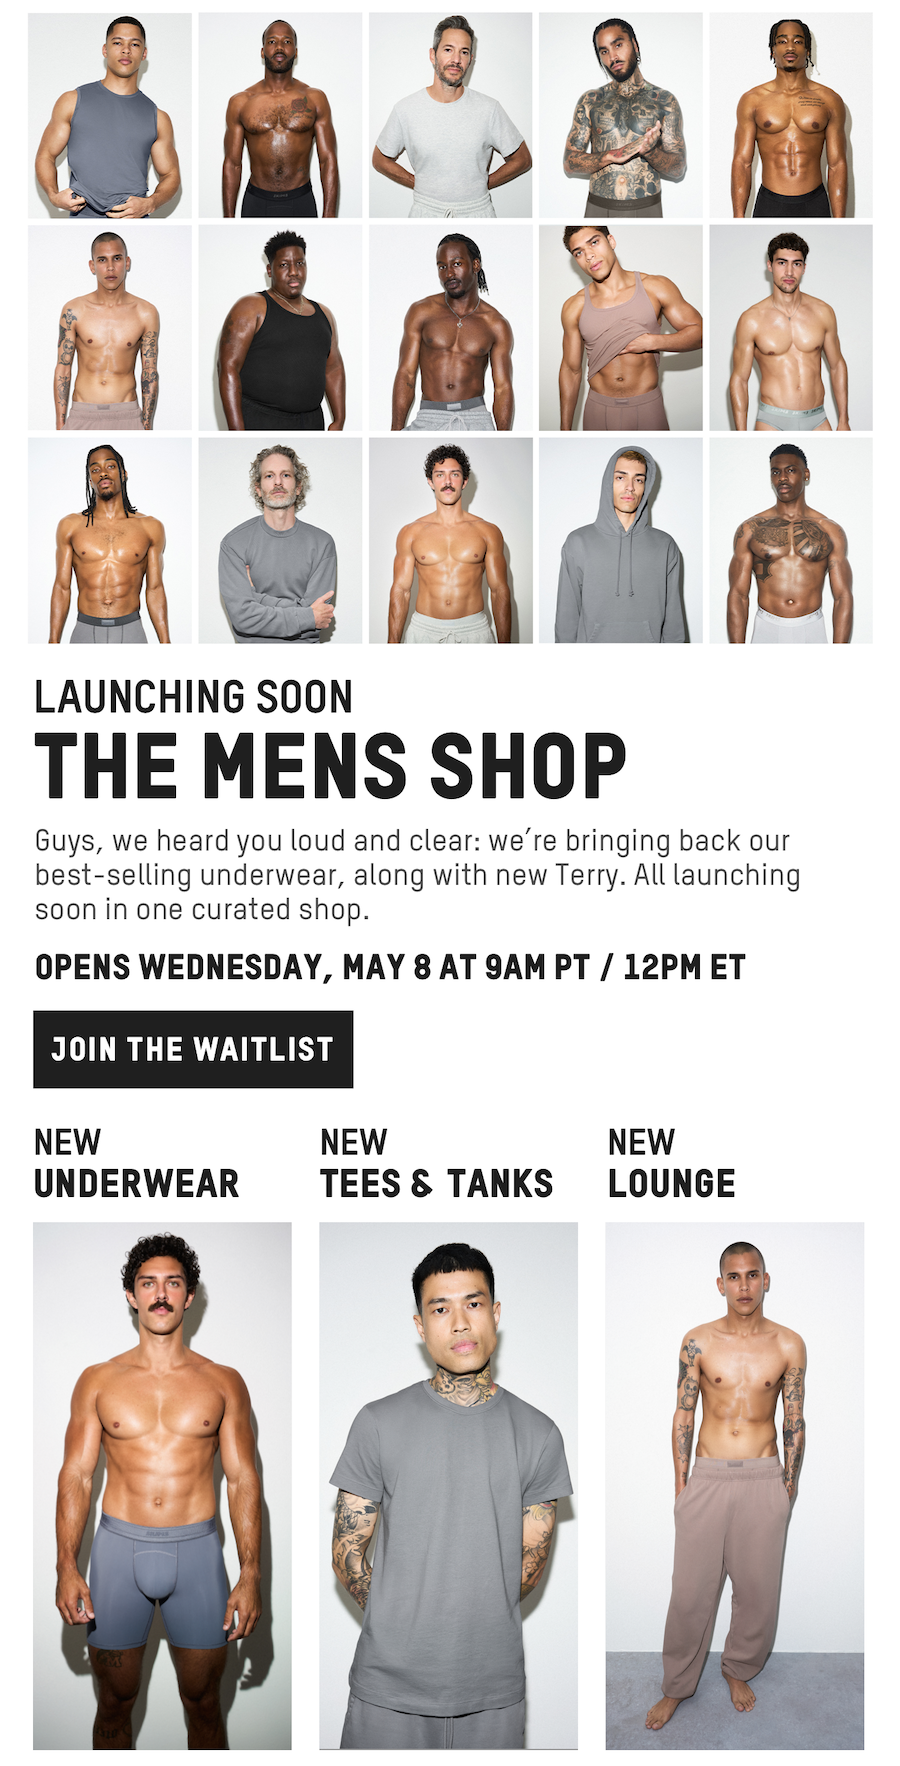 LAUNCHING SOON: THE MENS SHOP. JOIN THE WAITLIST.